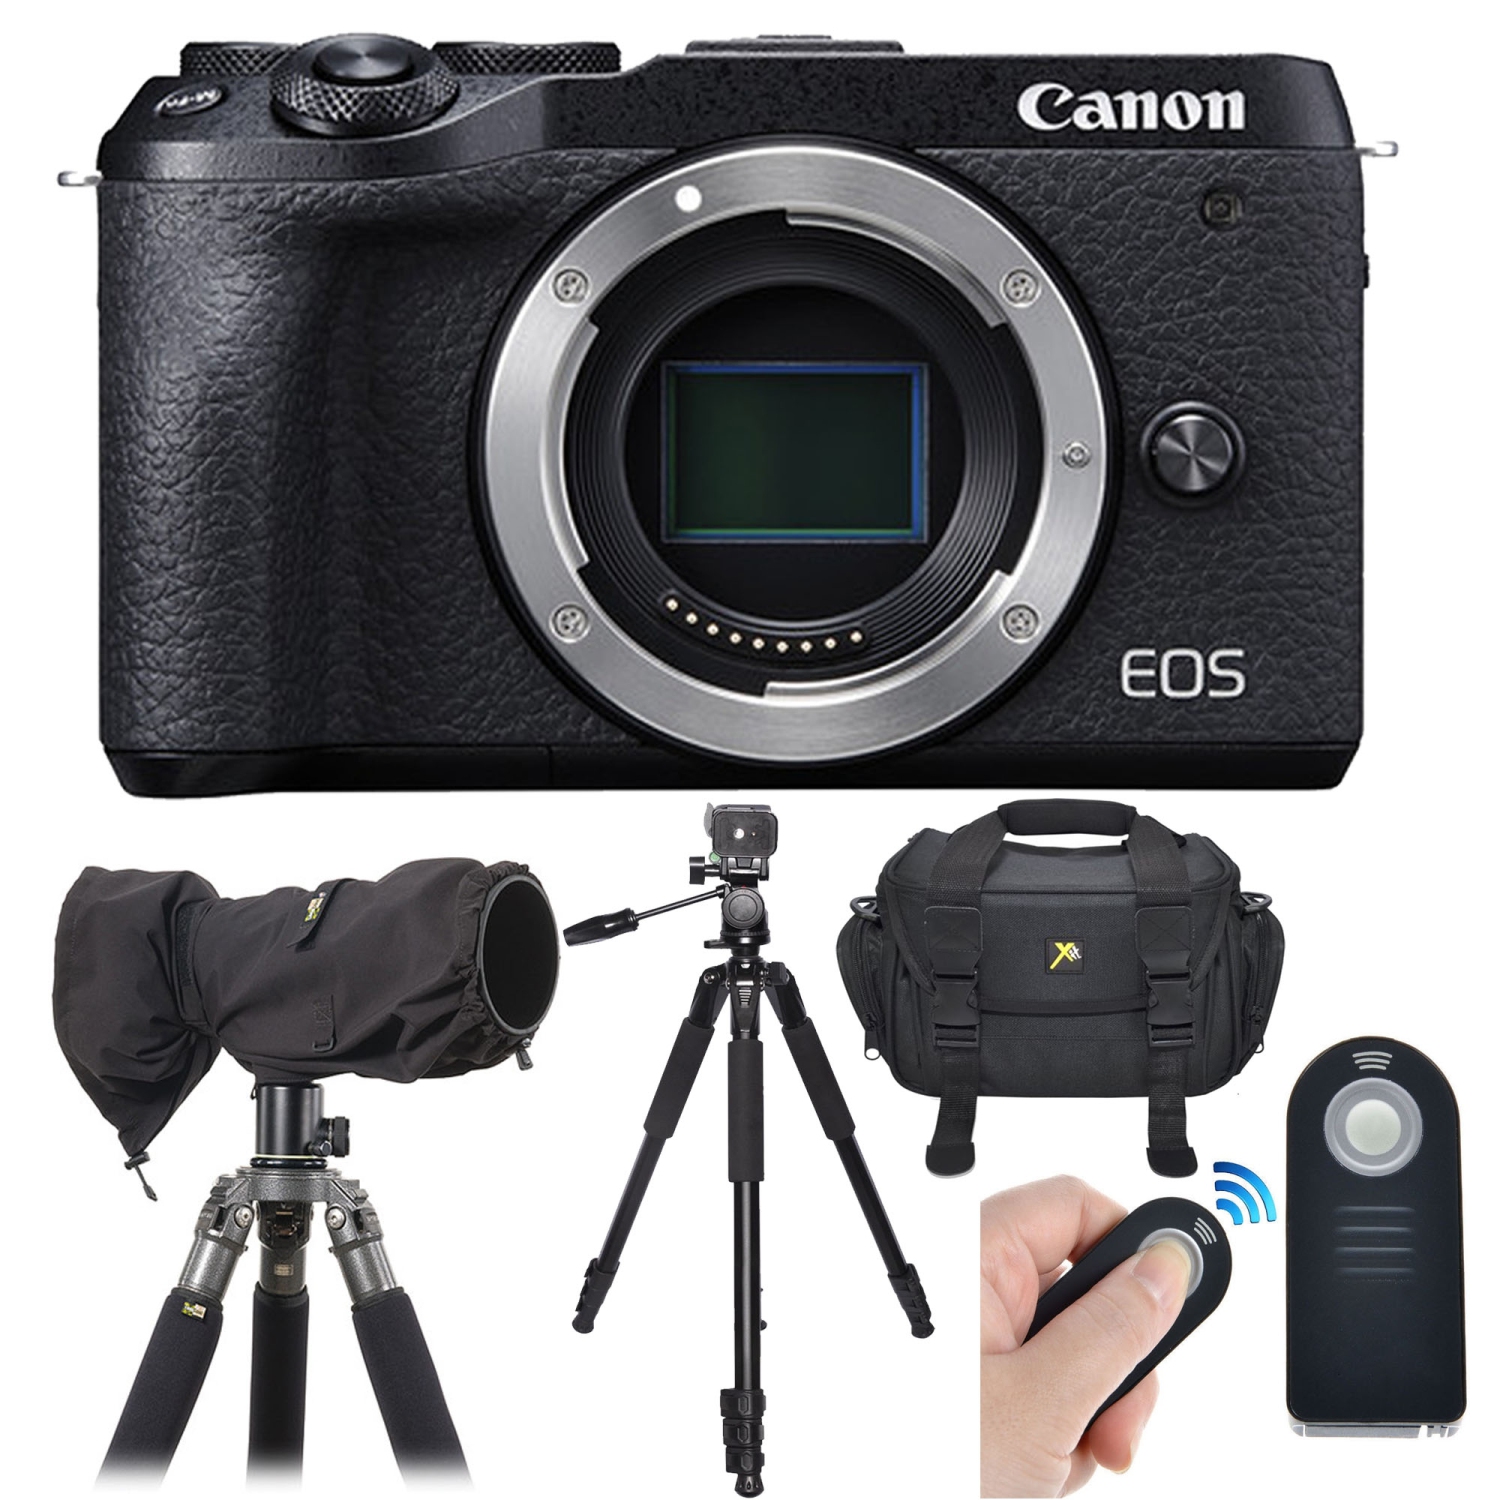 Canon EOS M6 Mark II Mirrorless Digital Camera (Body Only) with RainCoat Large Sleeve | Tripod | Case & Remote Deluxe Bundle - US Version w/ Seller Warranty